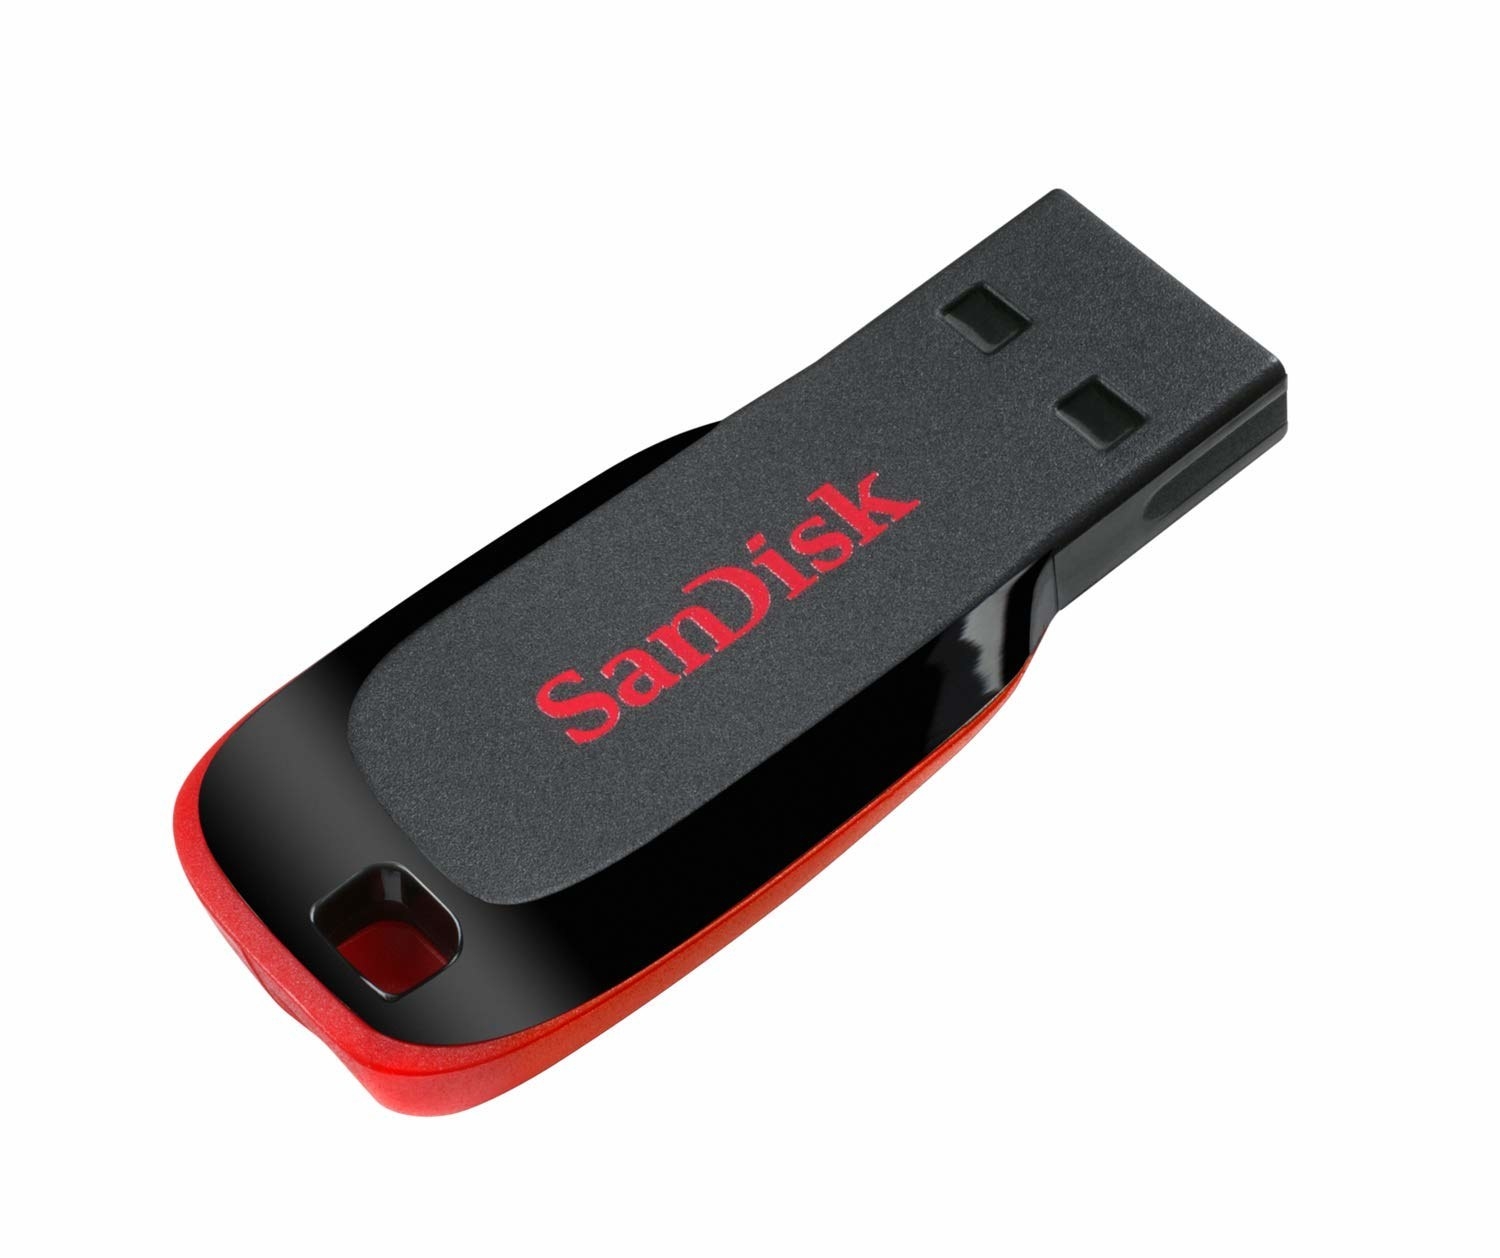 A pen drive in black and red.